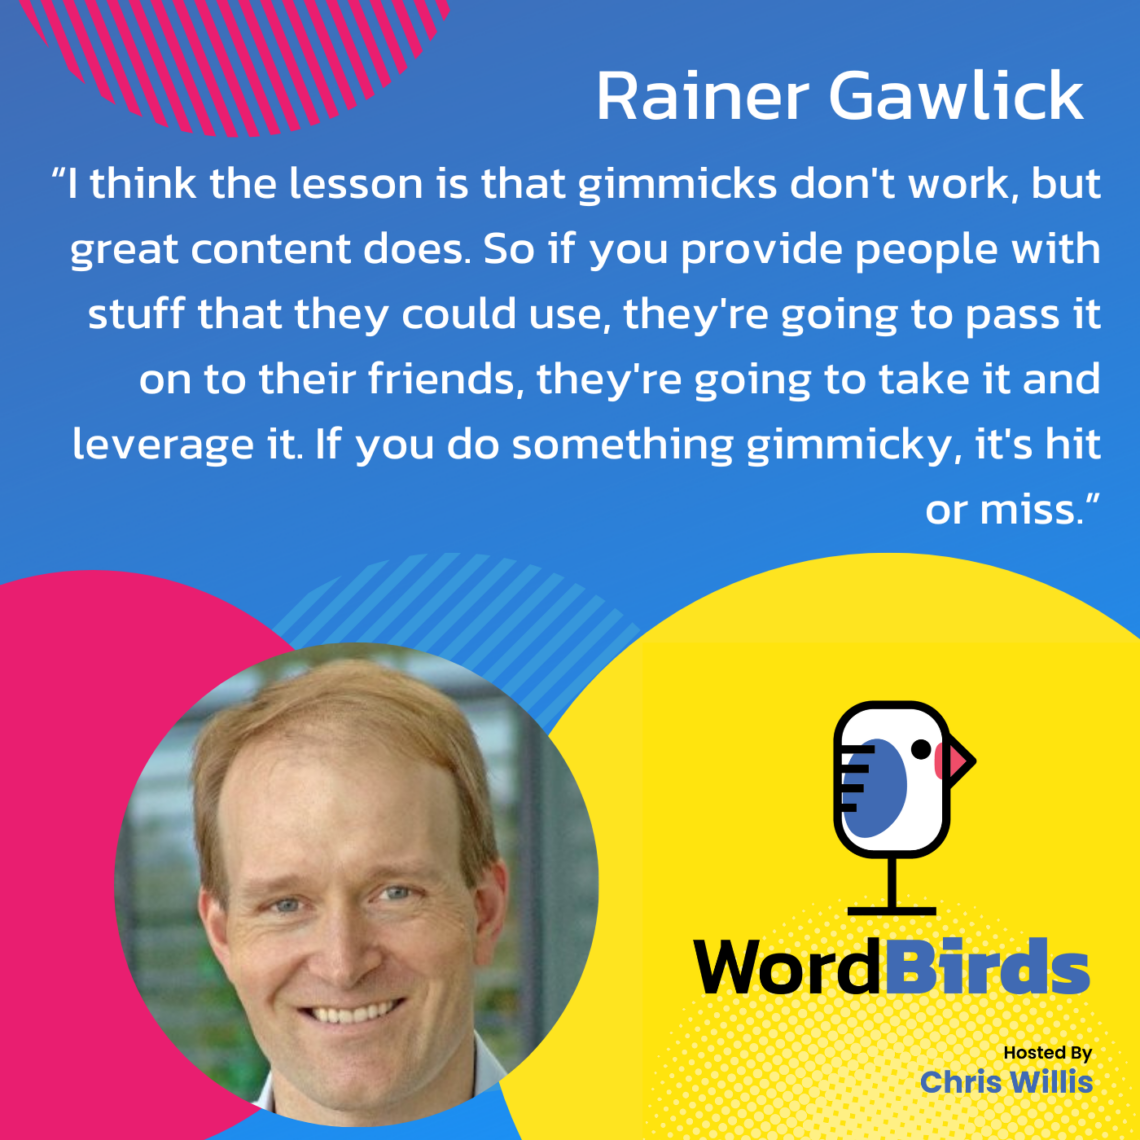 On a blue background there's a quote from Rainer Gawlick in white that takes up the majority of the image. The bottom of the image has a headshot image of Rainer and the WordBirds Podcast logo.